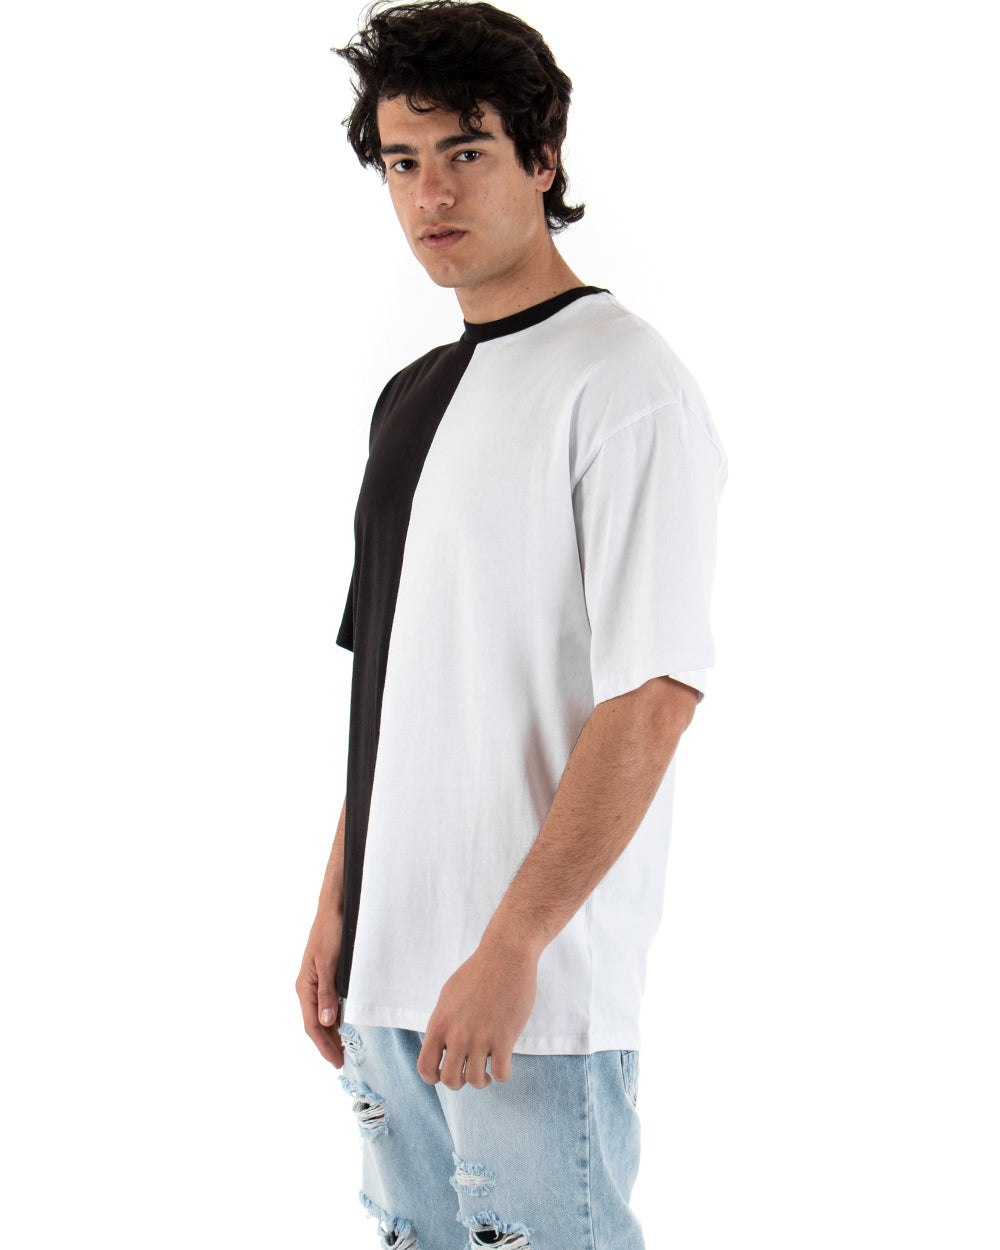 Men's T-shirt Short Sleeves Two-Tone Black White Round Neck Oversize Casual GIOSAL